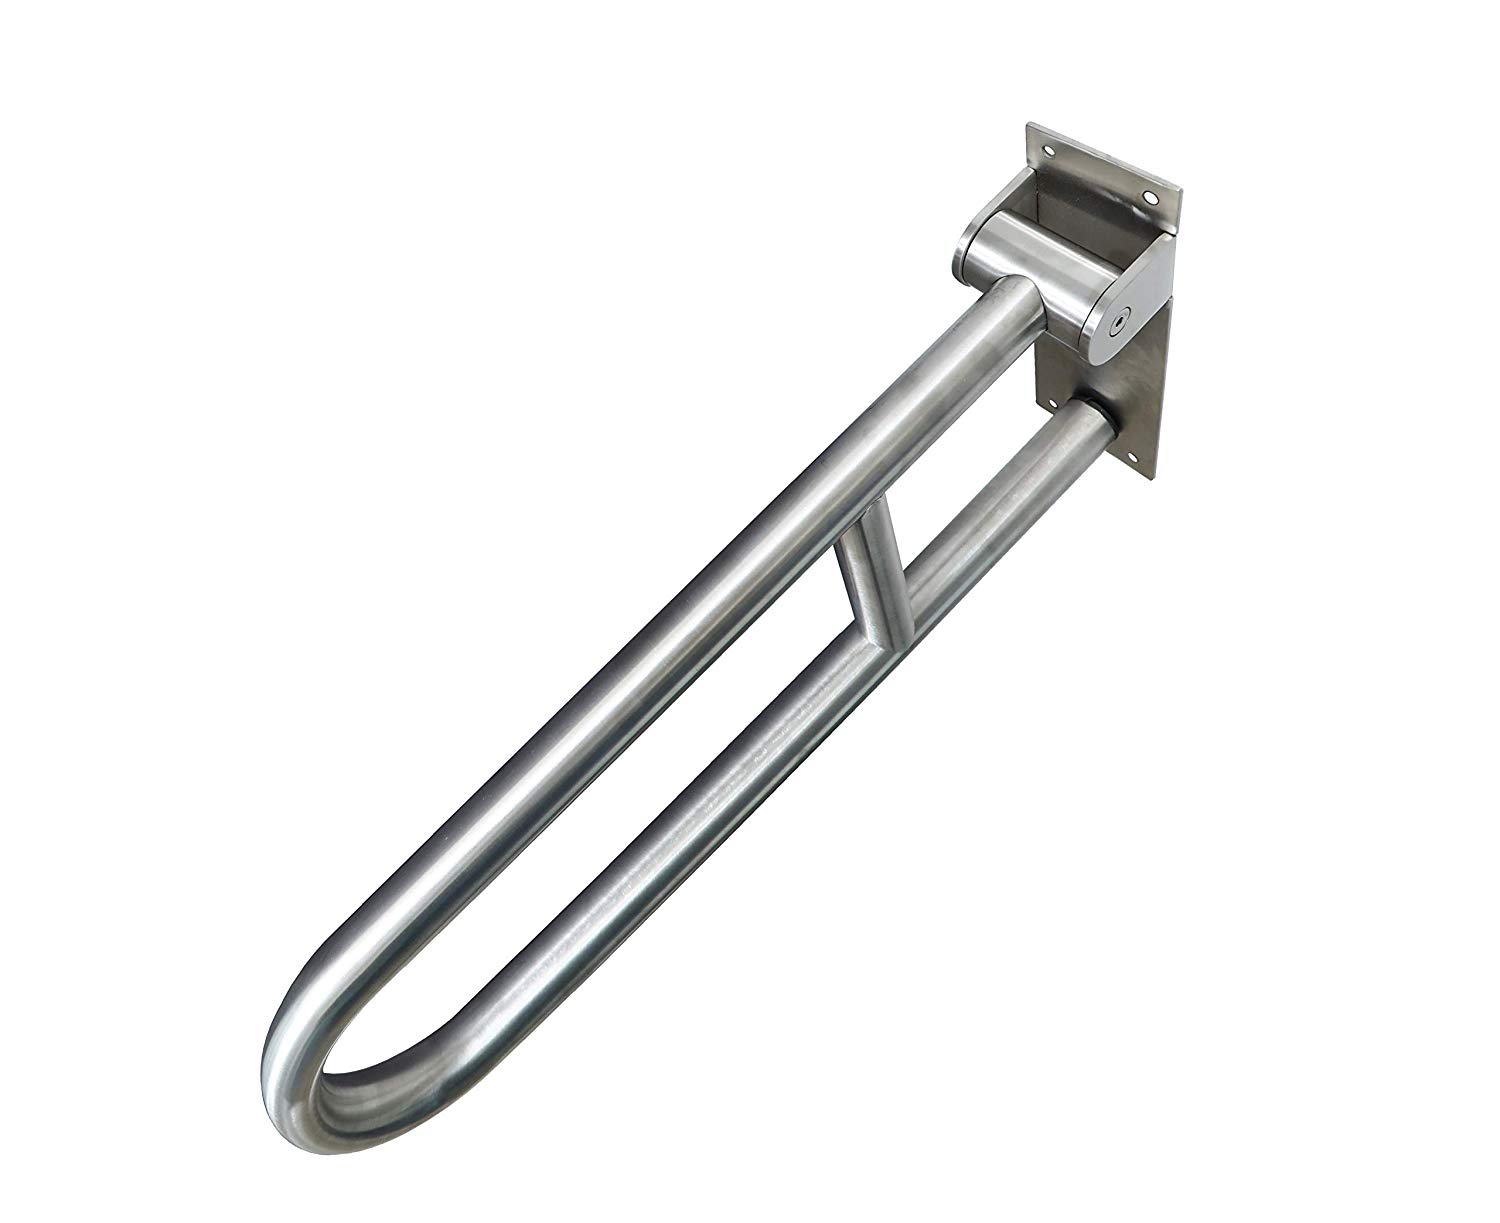 Buy Kosmo Care Heavy Duty Stainless Steel Swing Up Toilet Grab Bar at